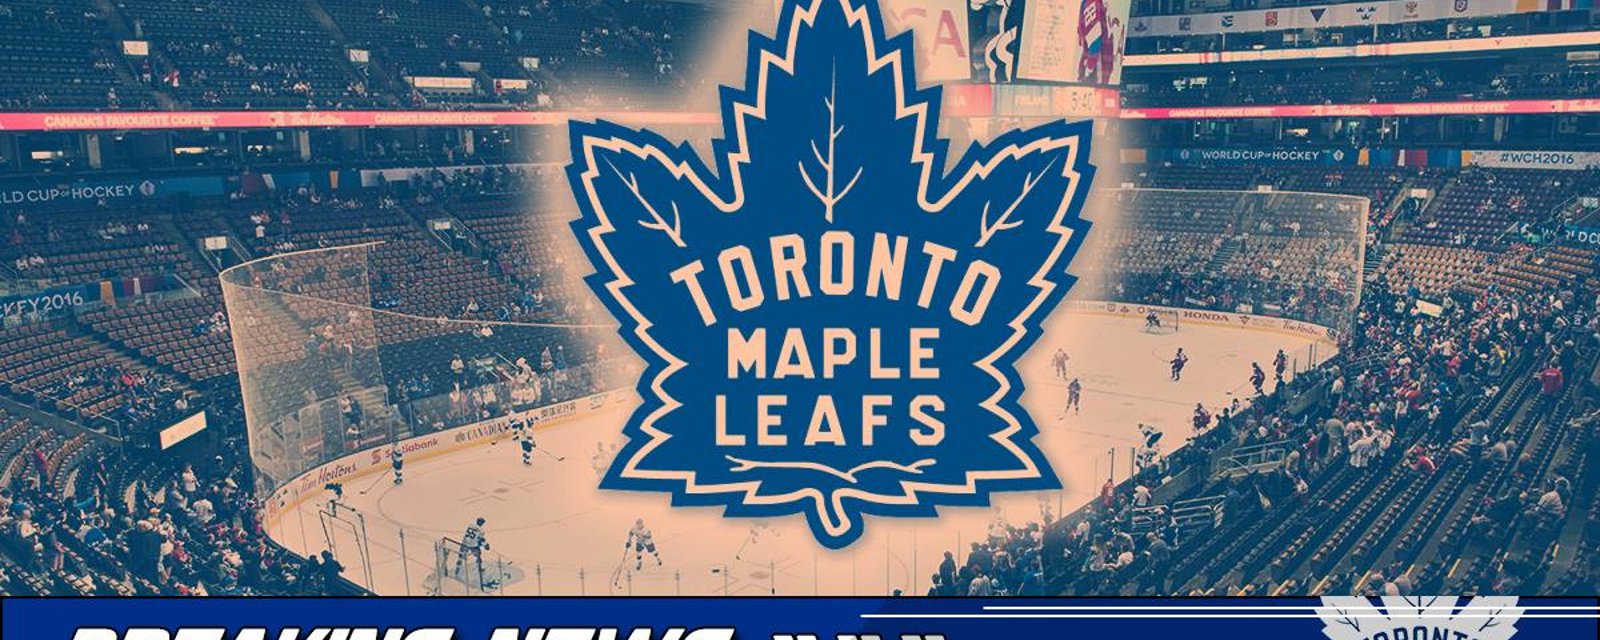 Member of the Maple Leafs arrested in crazy incident this week-end.